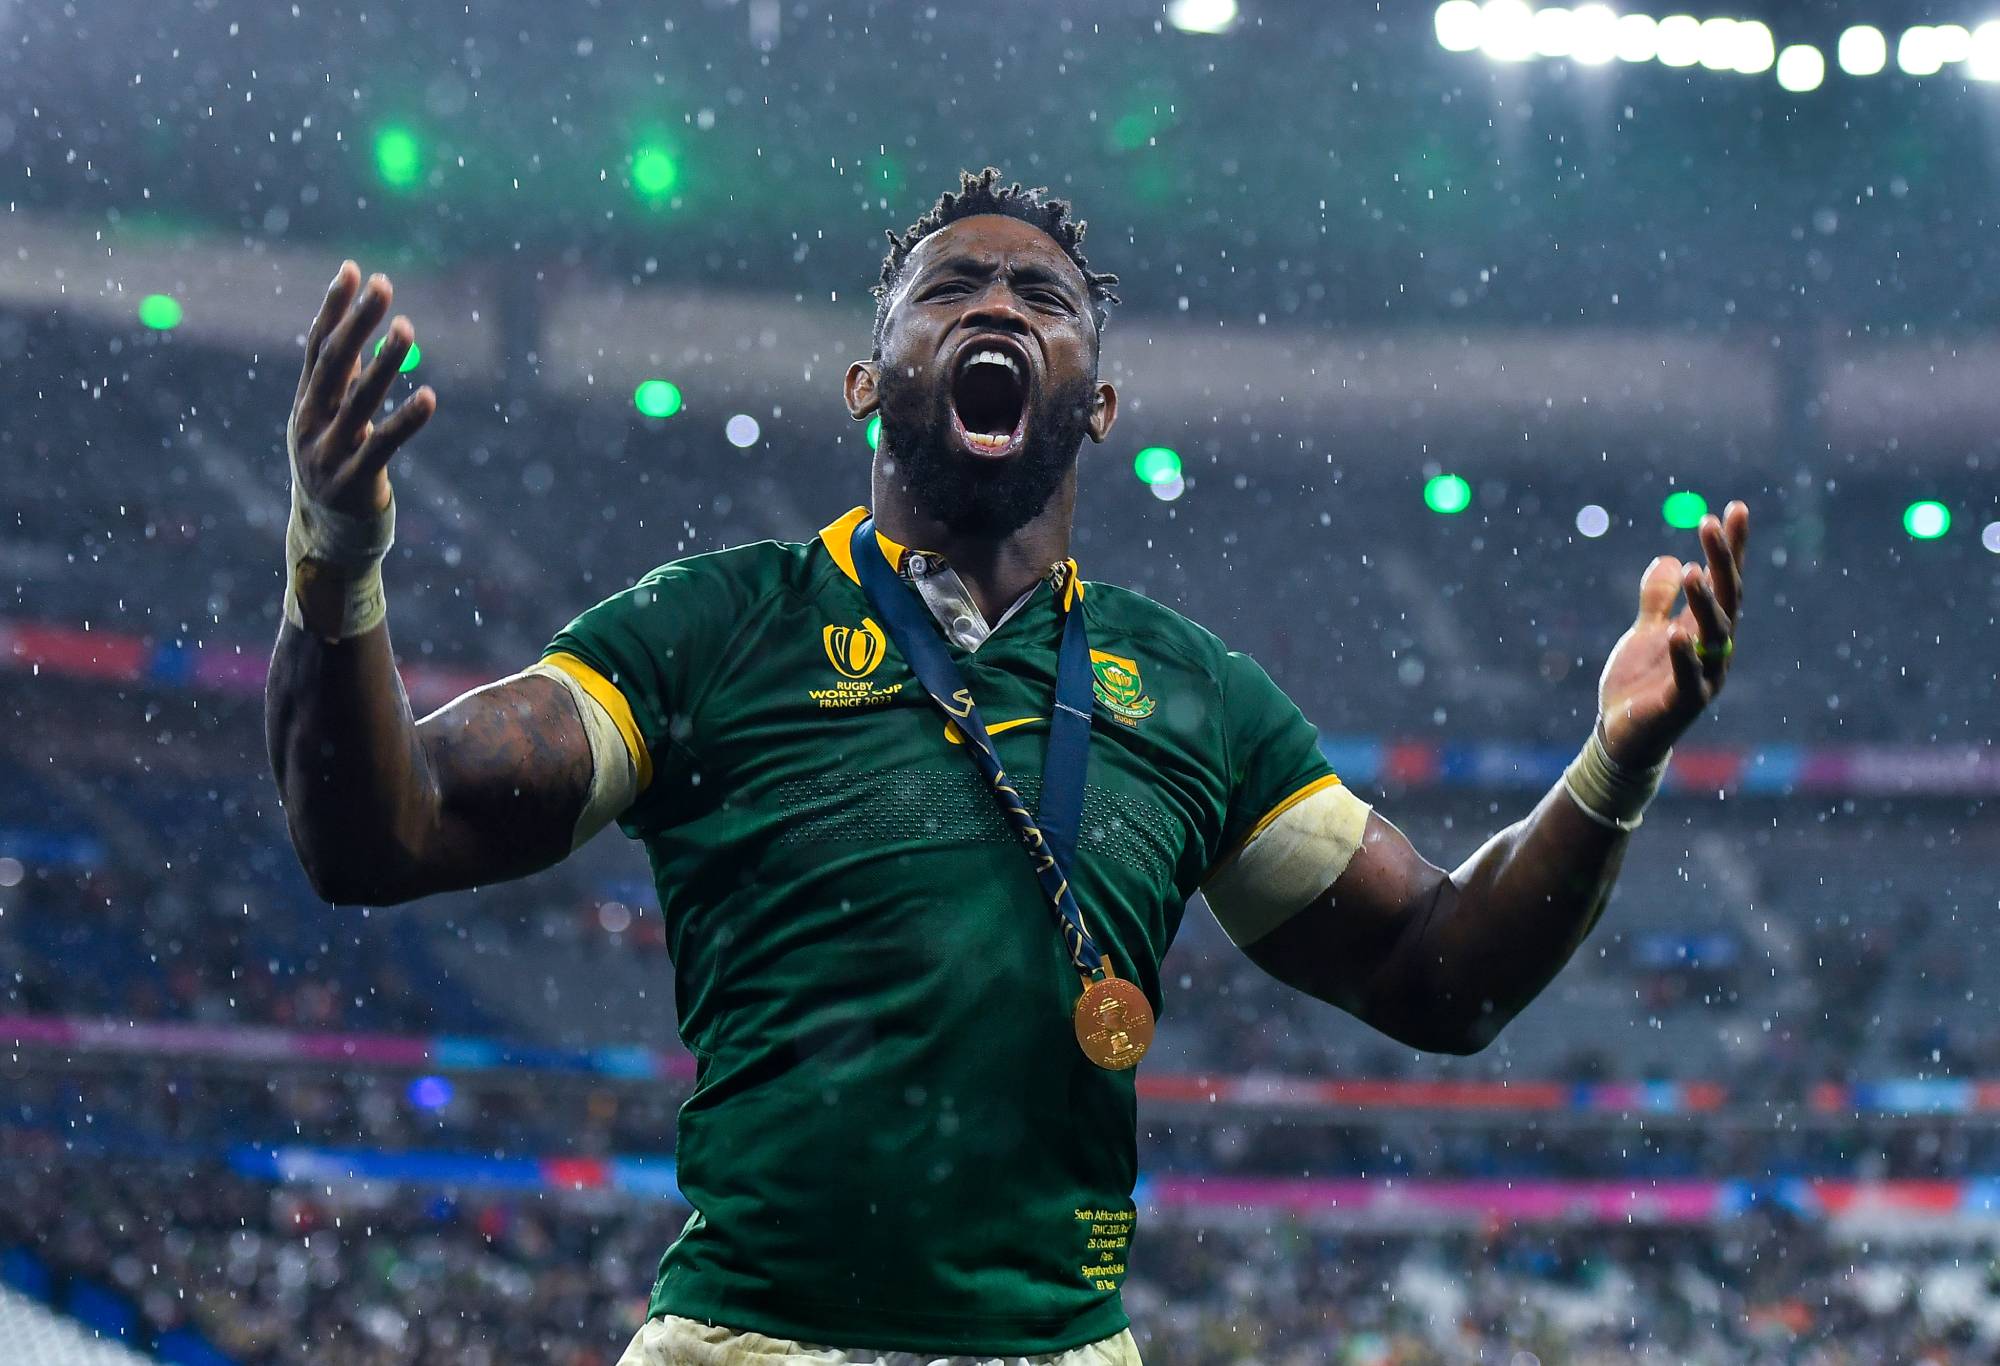 Siya Kolisi of South Africa celebrates at full-time after their team's victory during the Rugby World Cup France 2023 Gold Final match between New Zealand and South Africa at Stade de France on October 28, 2023 in Paris, France. (Photo by Franco Arland/Getty Images)